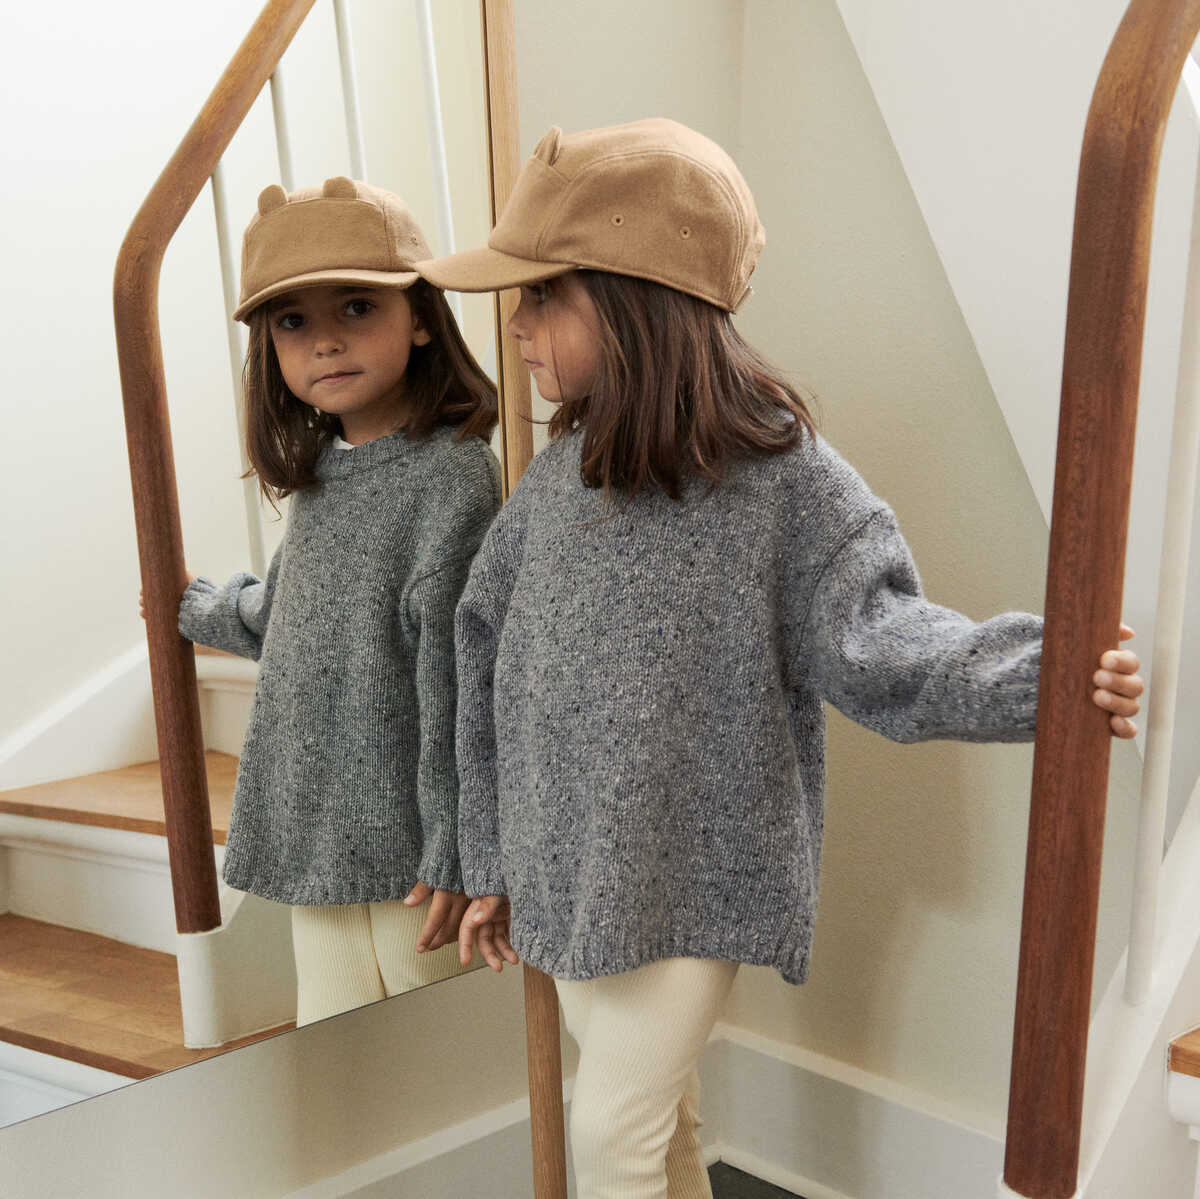 Alf & Co is a midlands based children’s store and they are stockist of the Liewood Reese Cap